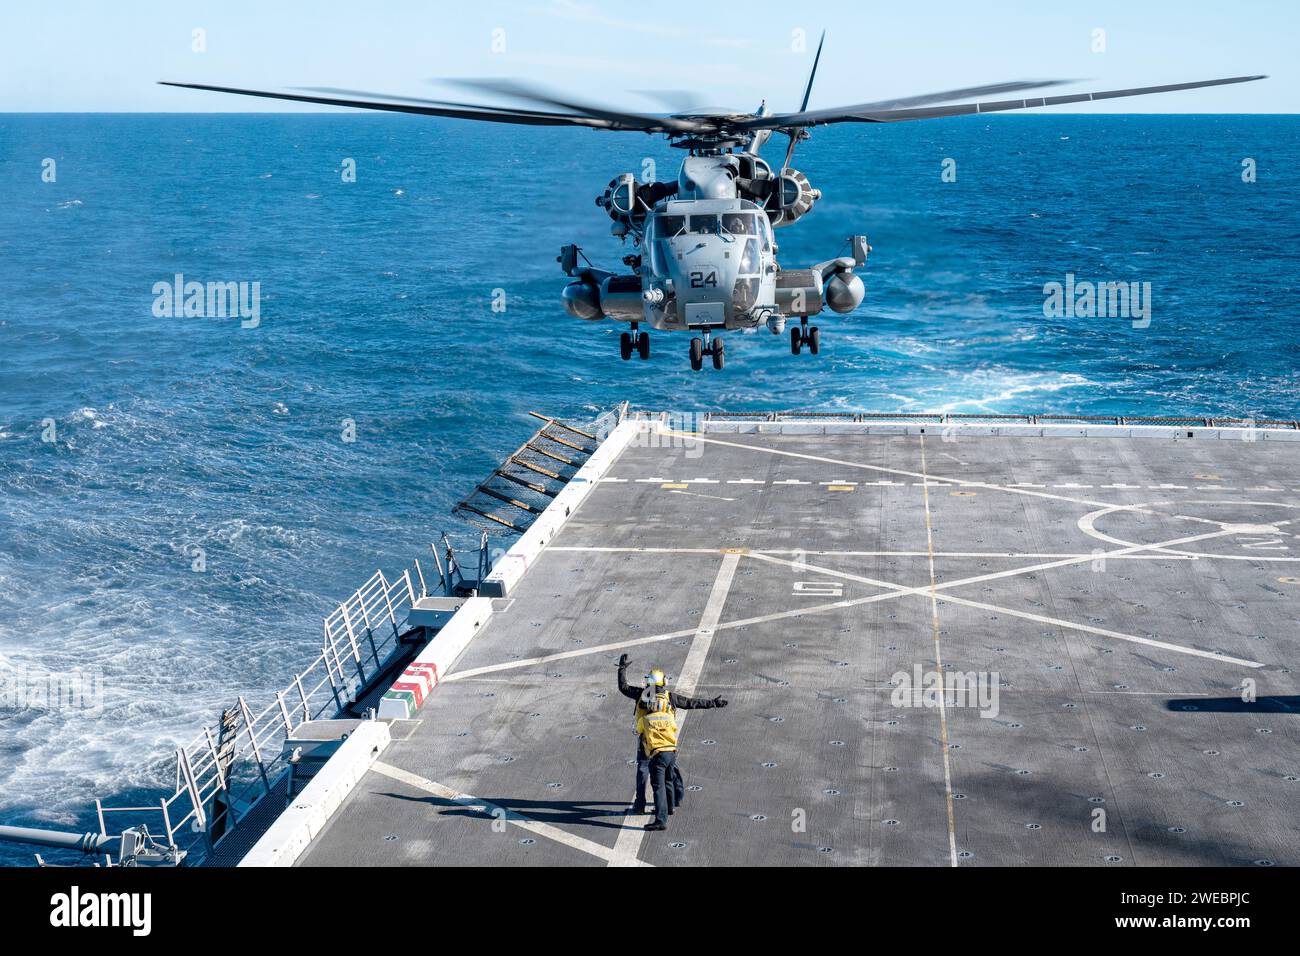 Aviation Boatswain supports Aviation Boatswain's Mate as he signals a CH-53E Super Stallion helicopter assigned to the “White Knights” of Marine Medium Tiltrotor Squadron (VMM) 165 (Reinforced) during flight quarters aboard the San Antonio-class amphibious transport dock ship USS Somerset (LPD 25) while underway in the Pacific Ocean Stock Photo